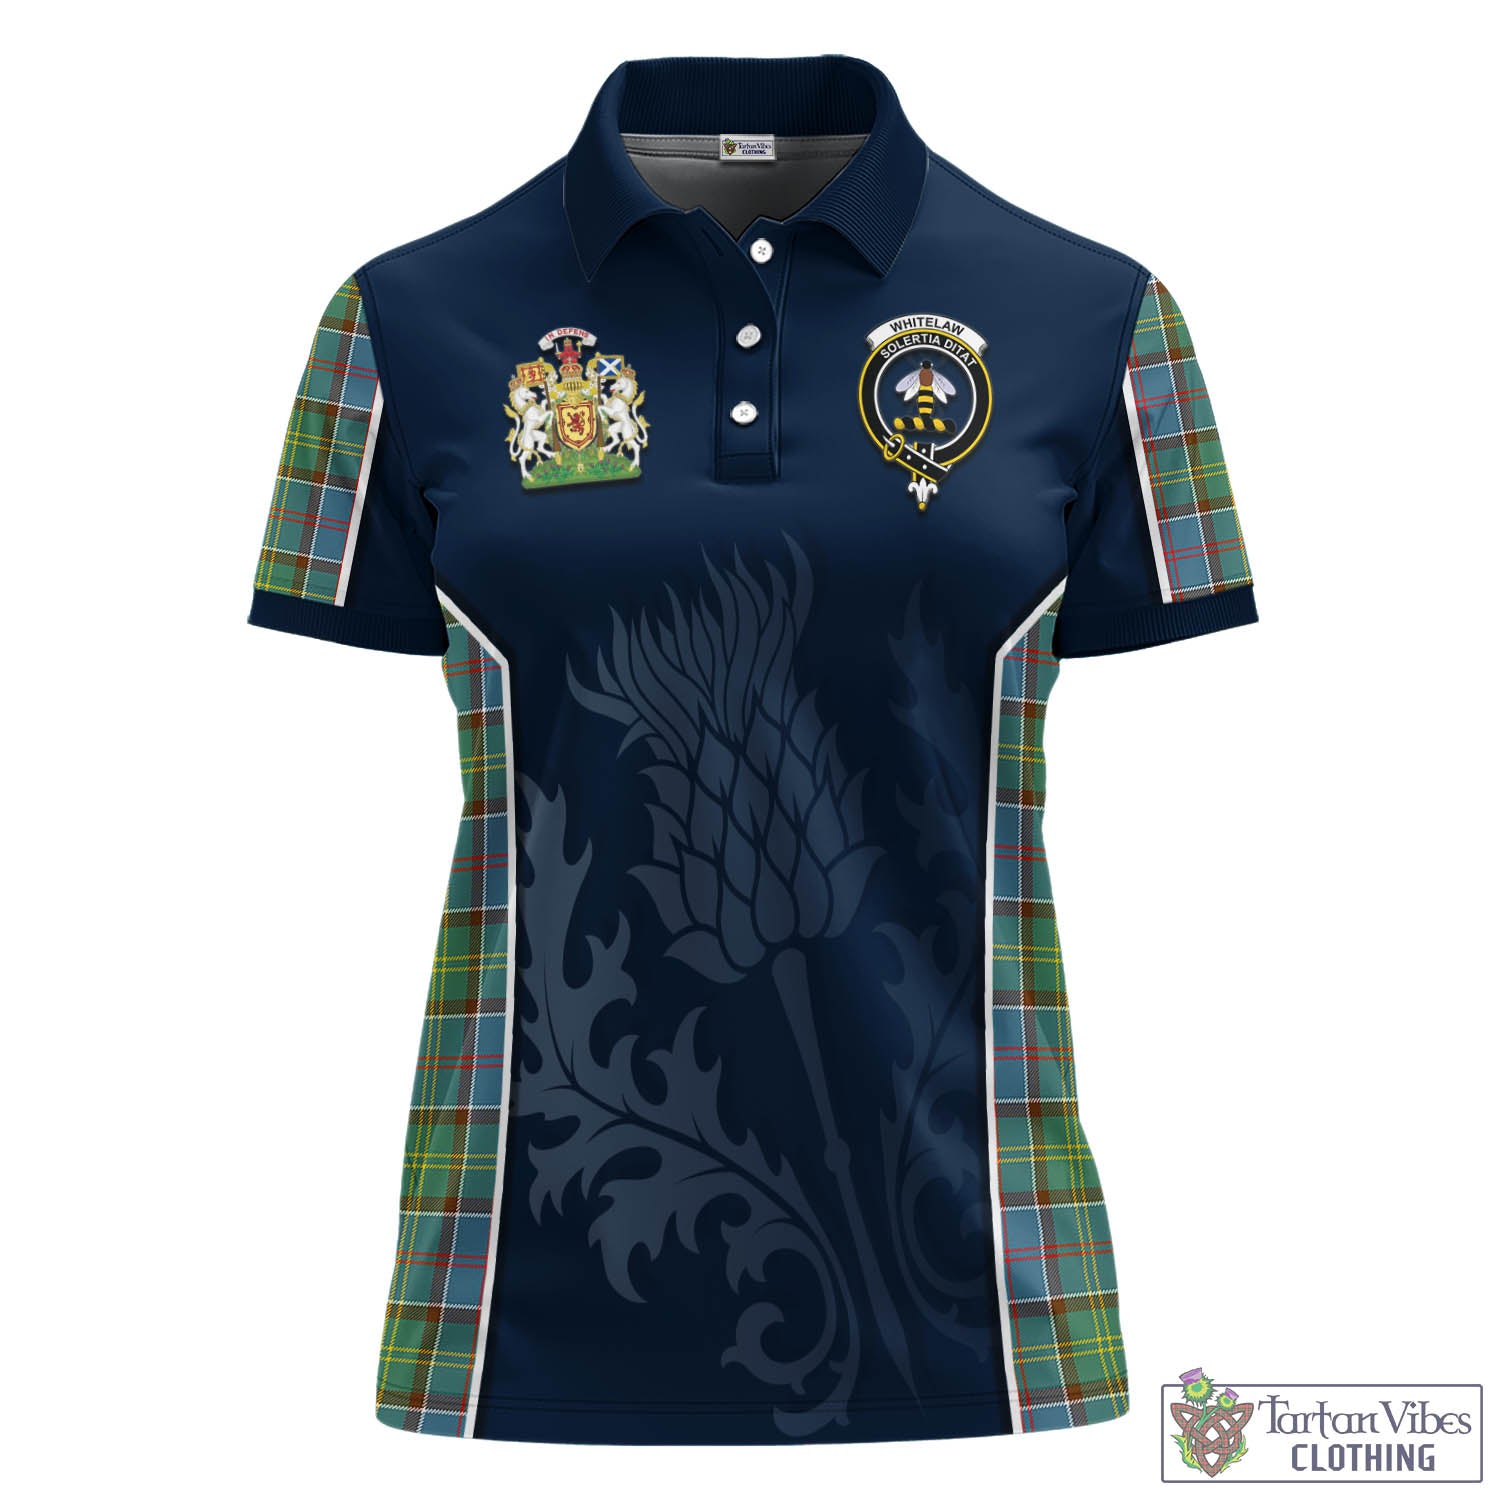 Tartan Vibes Clothing Whitelaw Tartan Women's Polo Shirt with Family Crest and Scottish Thistle Vibes Sport Style